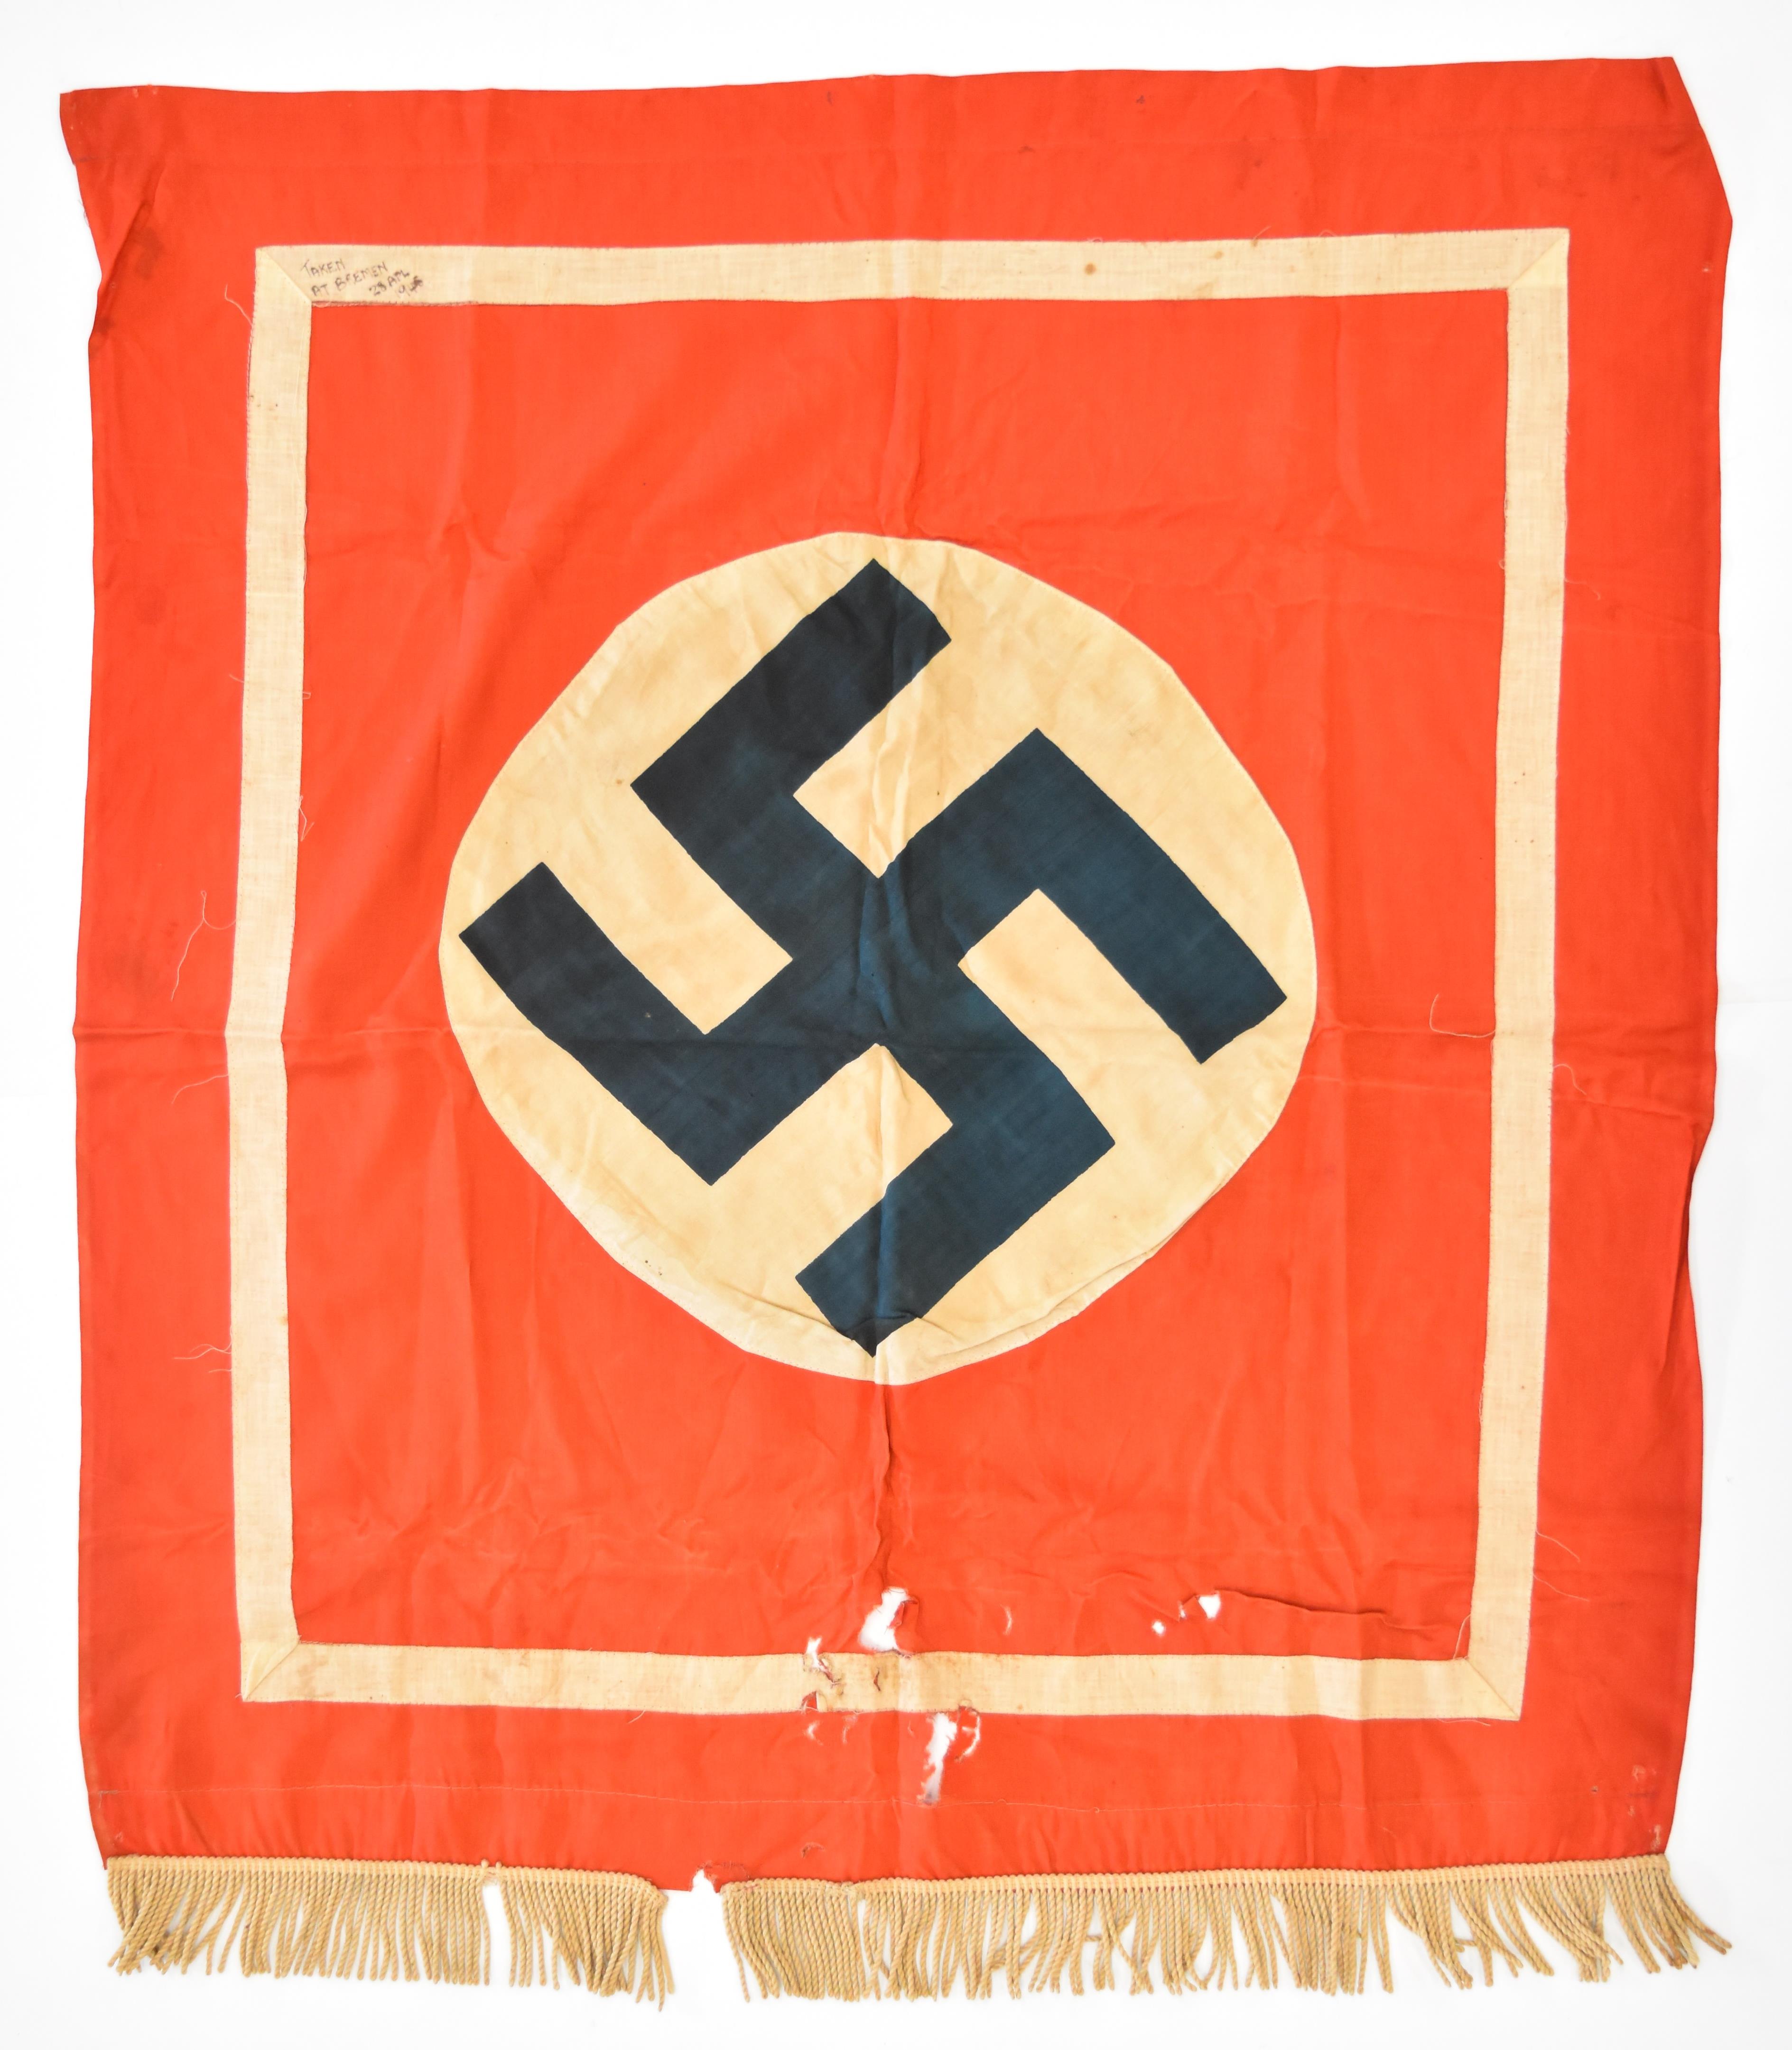 German WW2 Nazi Third Reich flag with large stitched swastika to centre and tassels to bottom